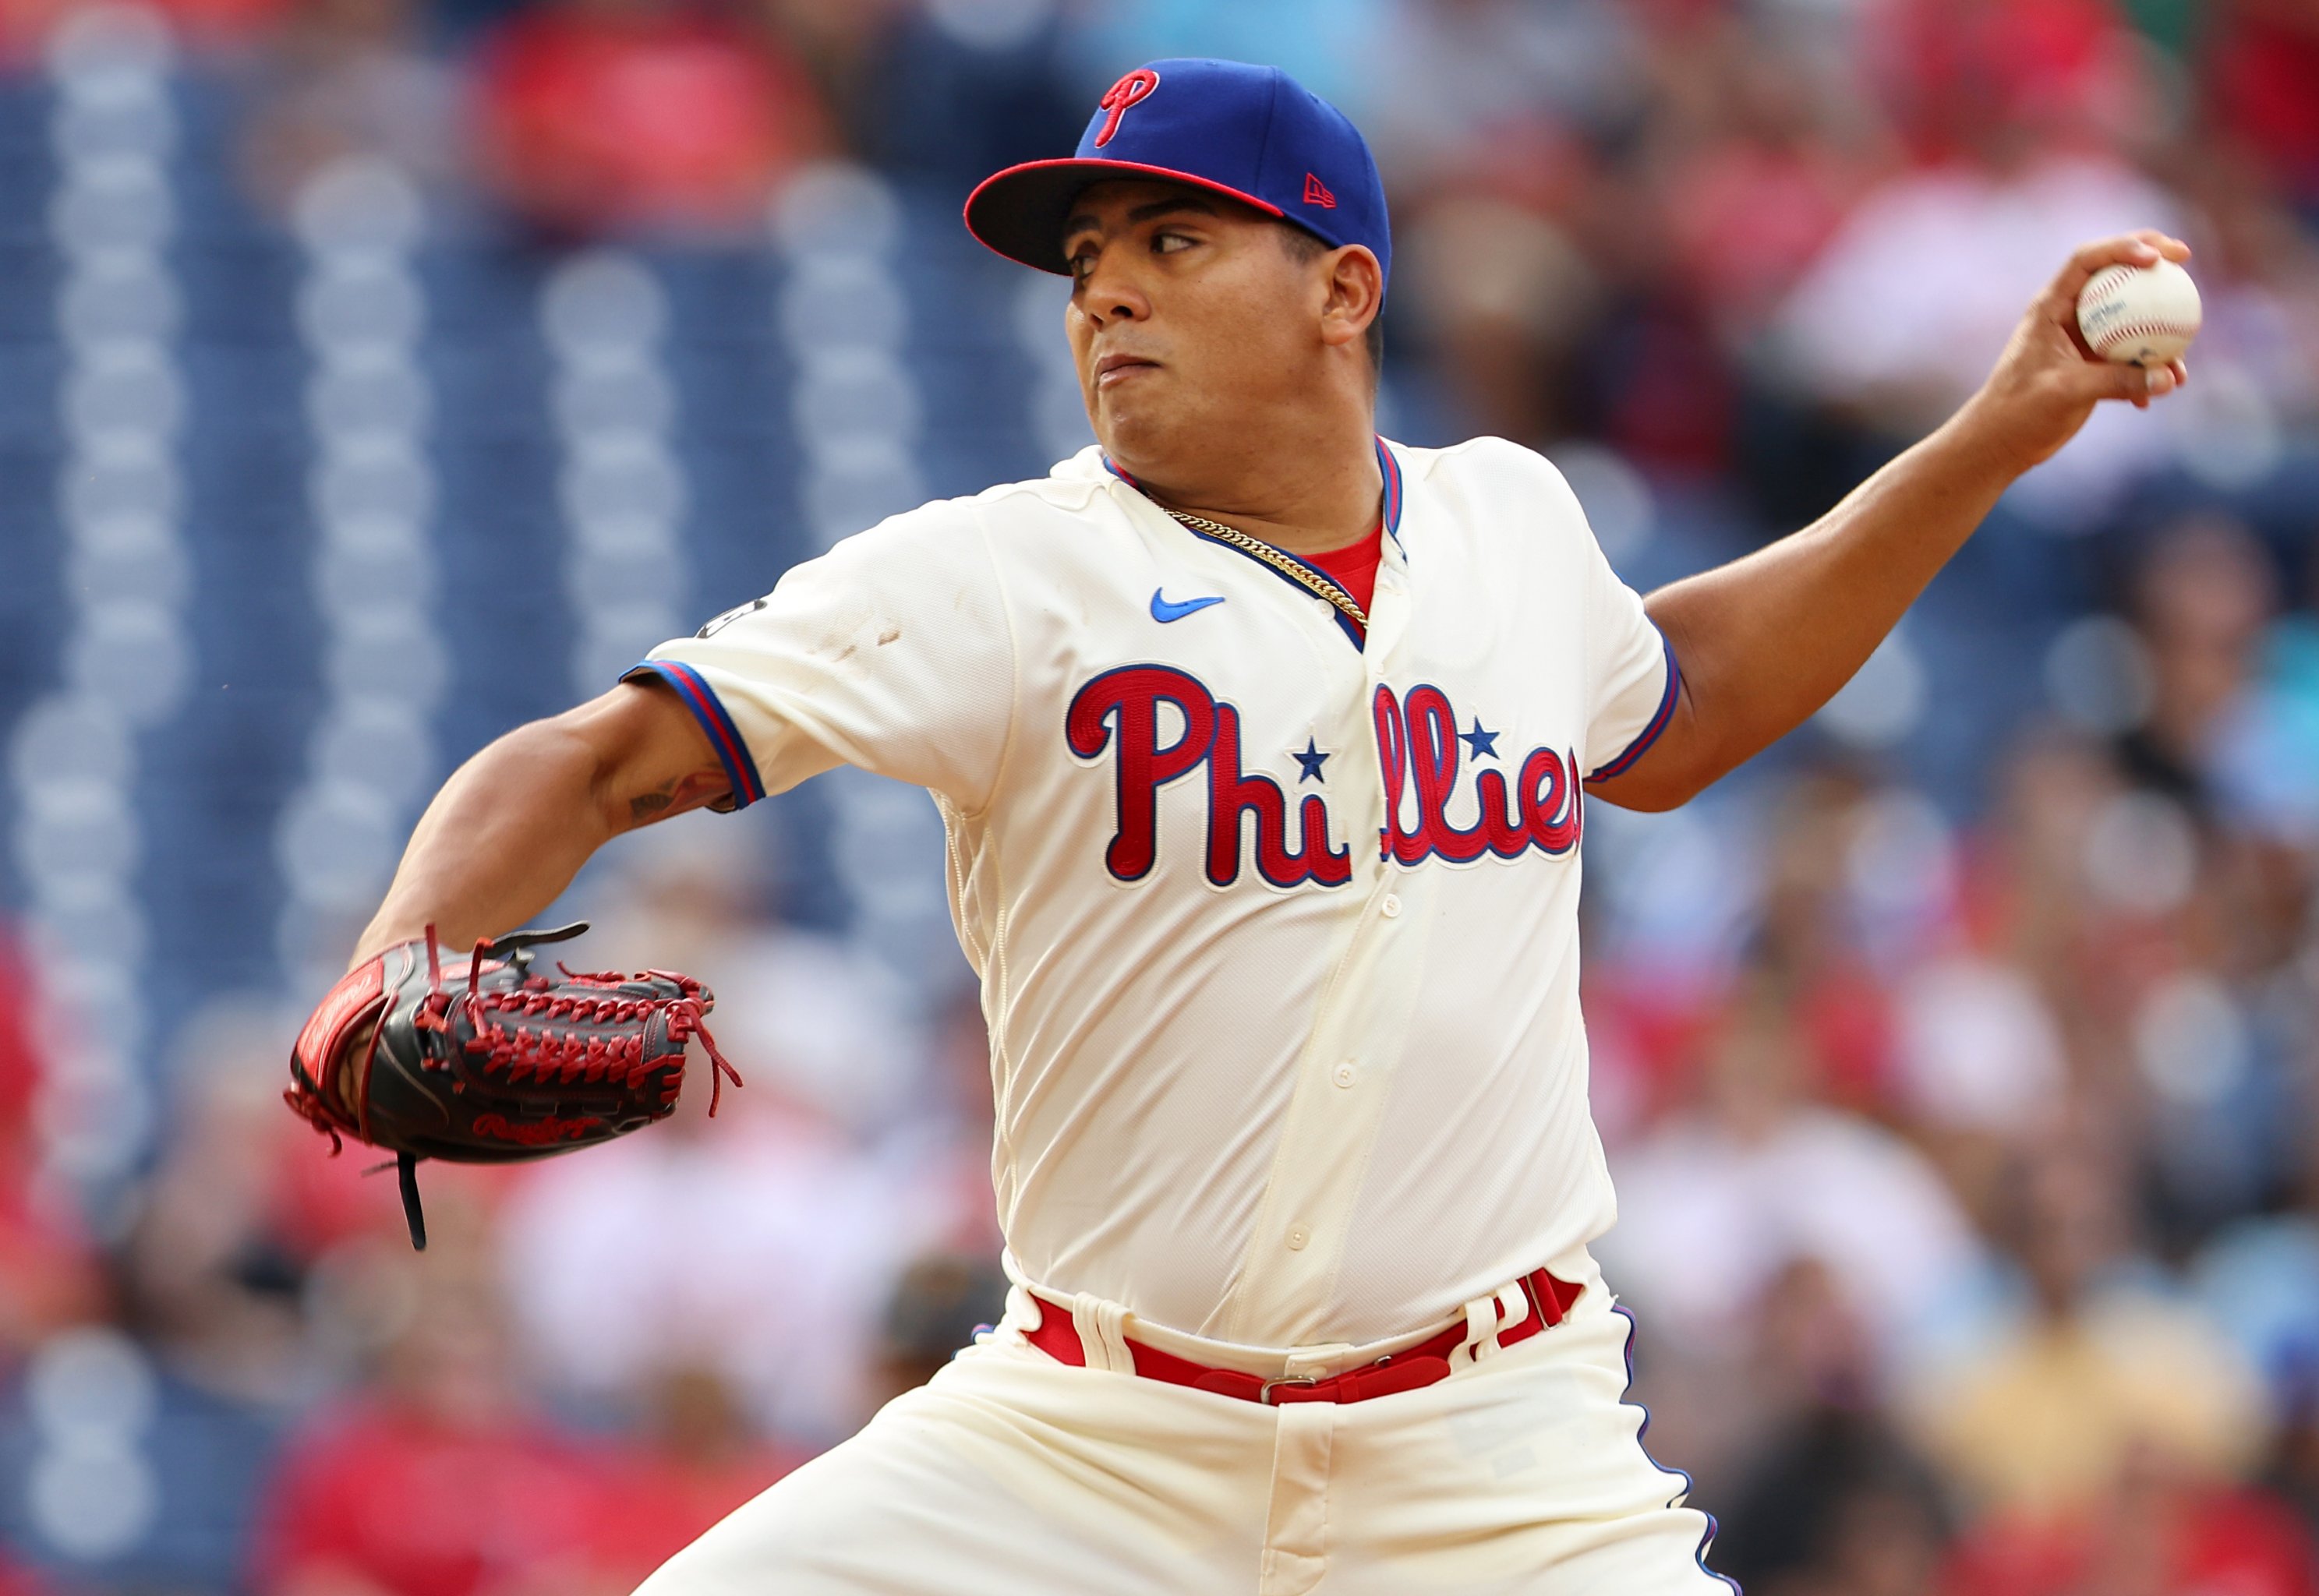 Top 10 MLB Relief Pitchers for 2022